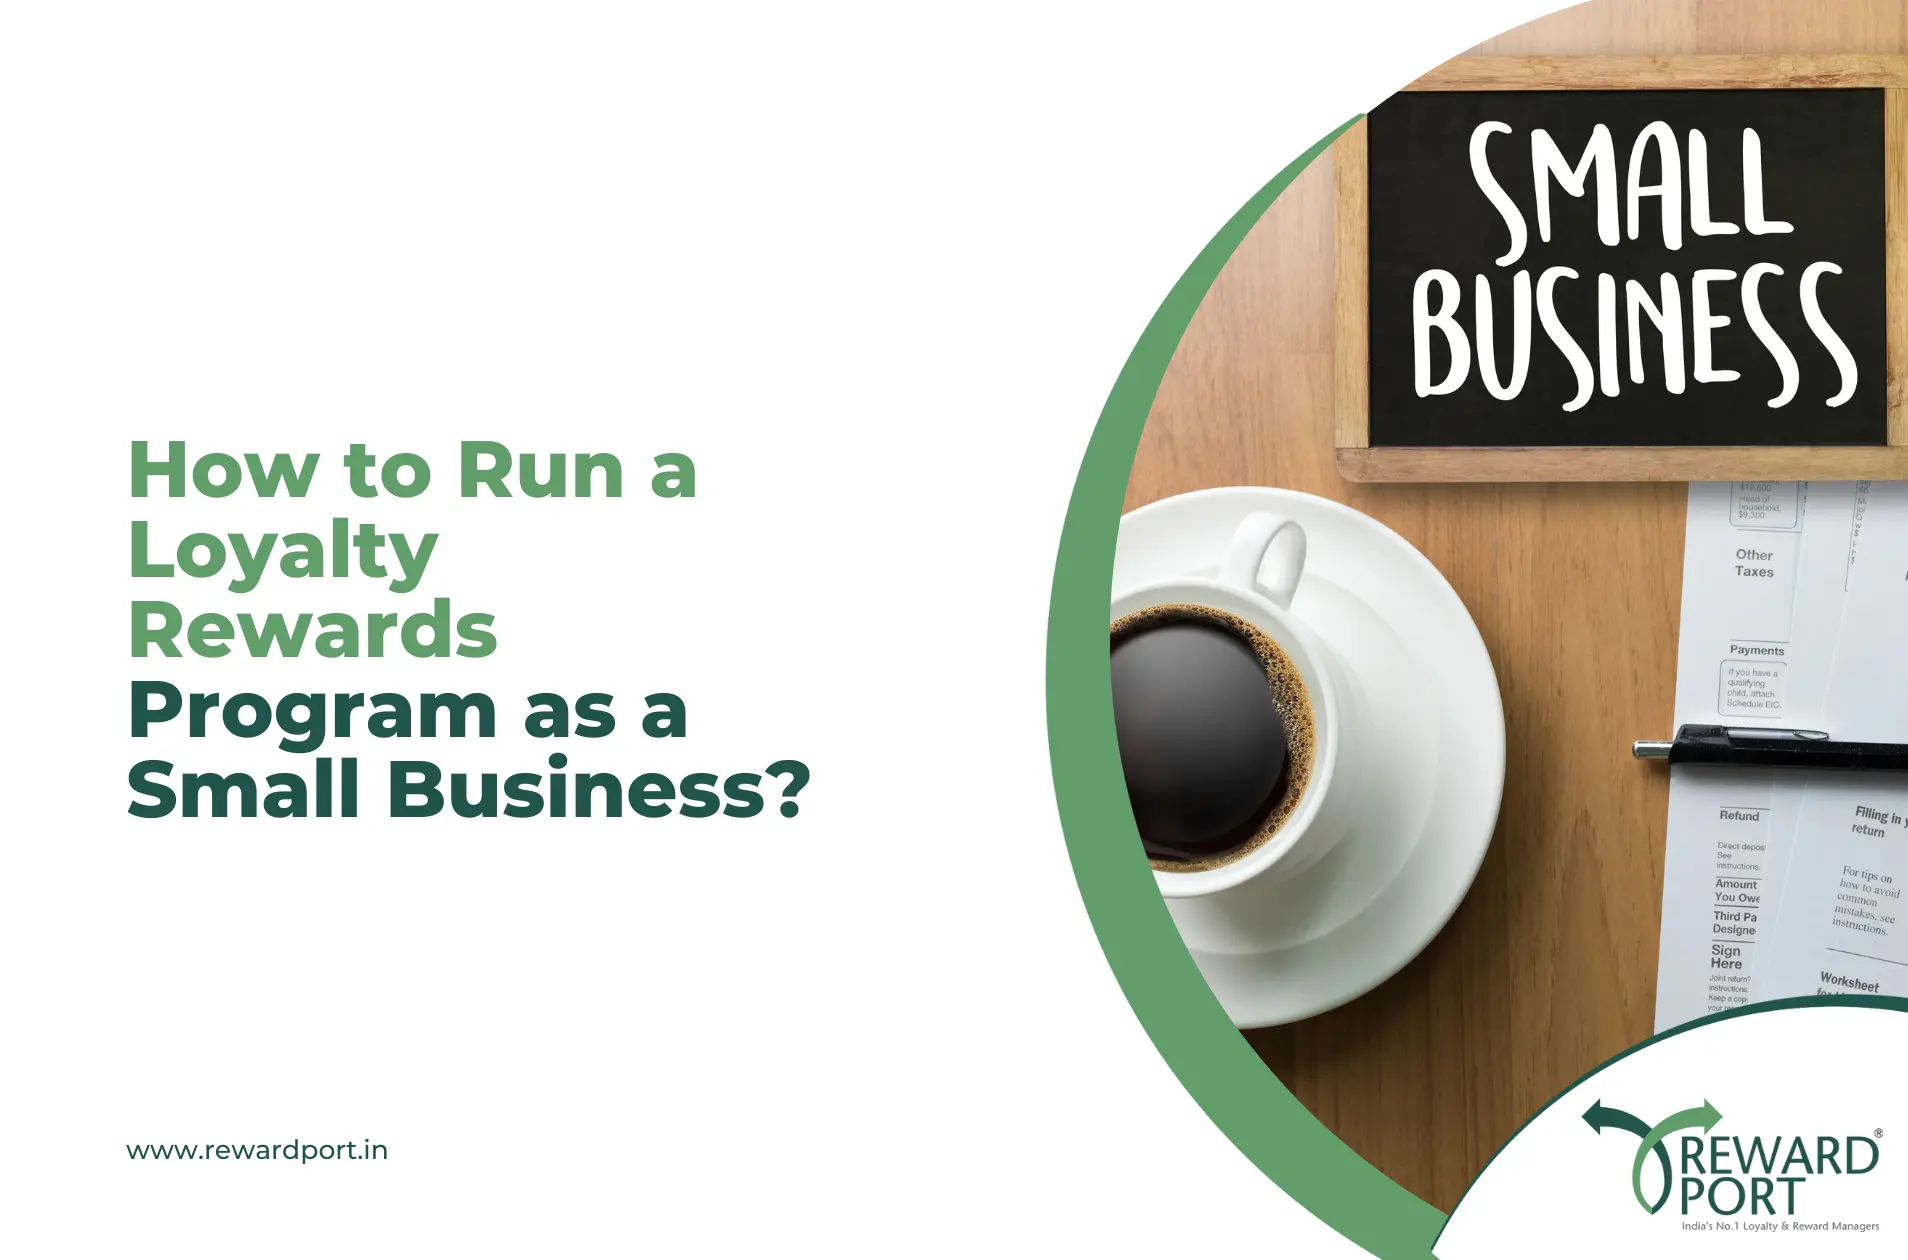 How to Run a Loyalty Rewards Program as a Small Business